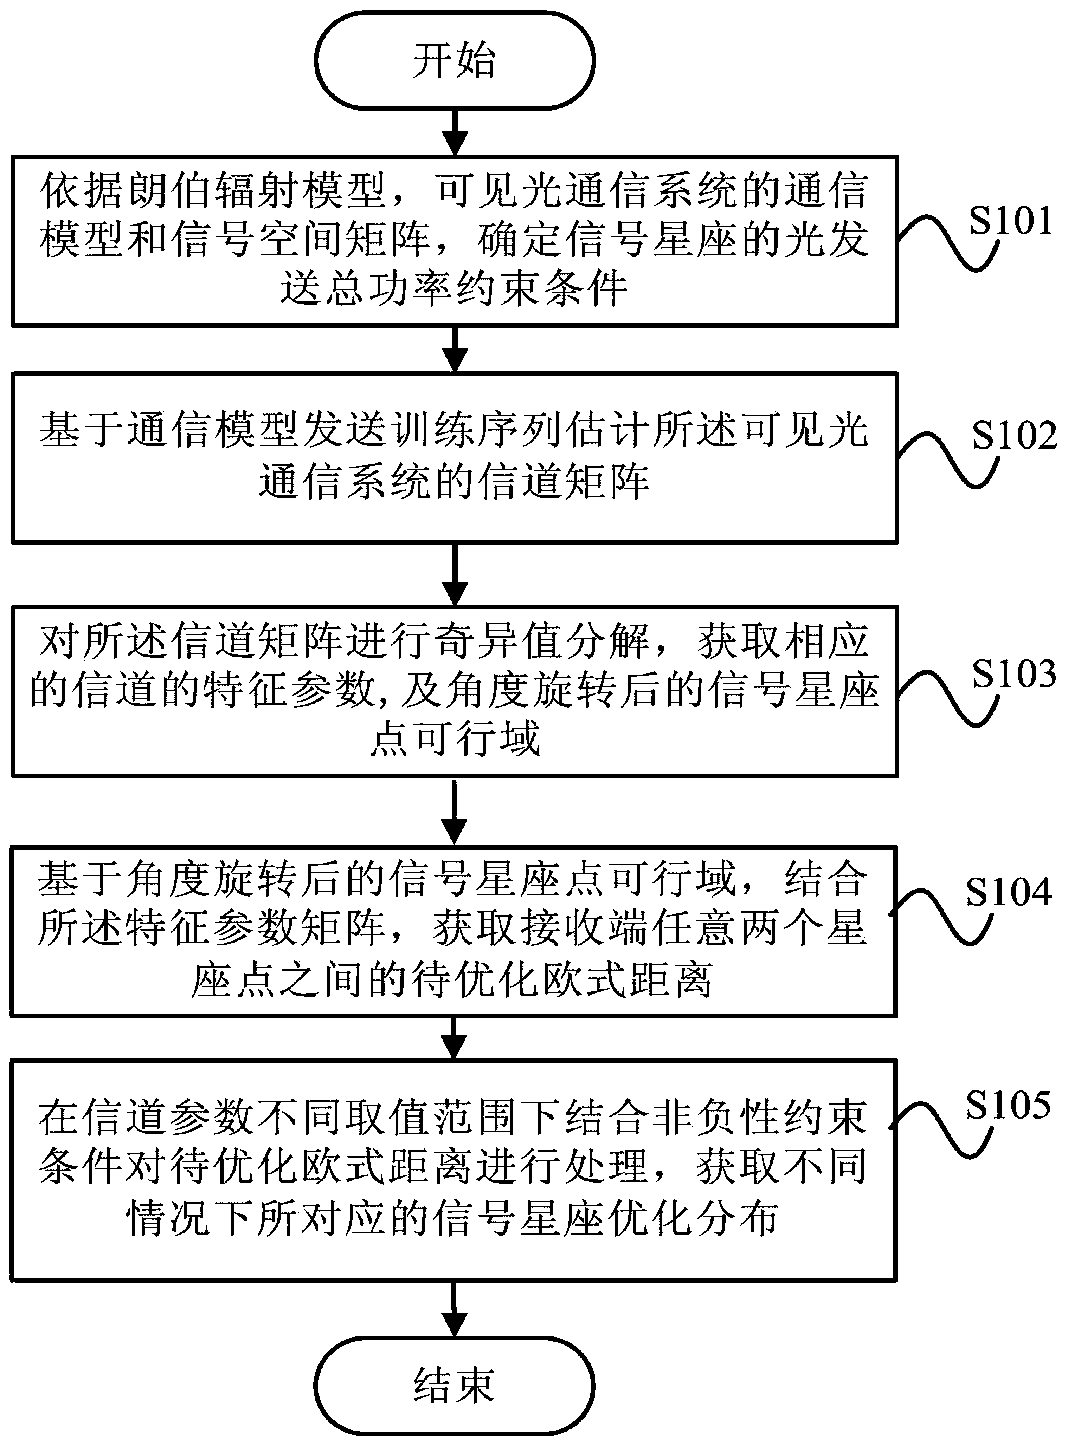 Visible light communication signal constellation design method, device and system